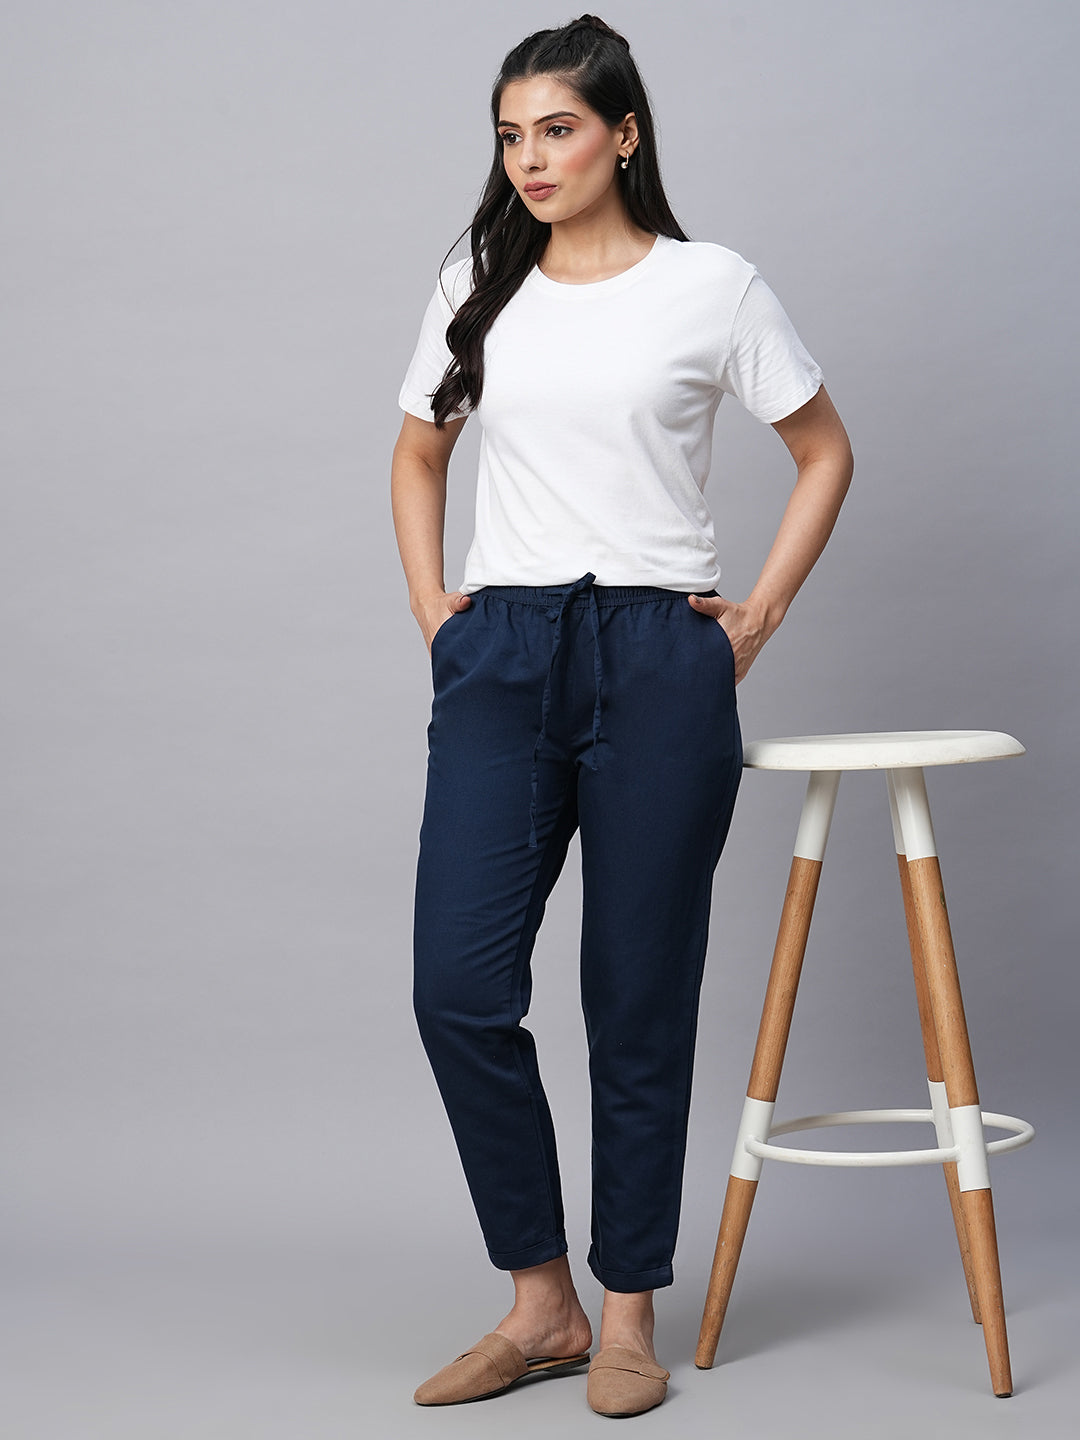 What to Wear With Navy Pants for Womens - The Product Guide